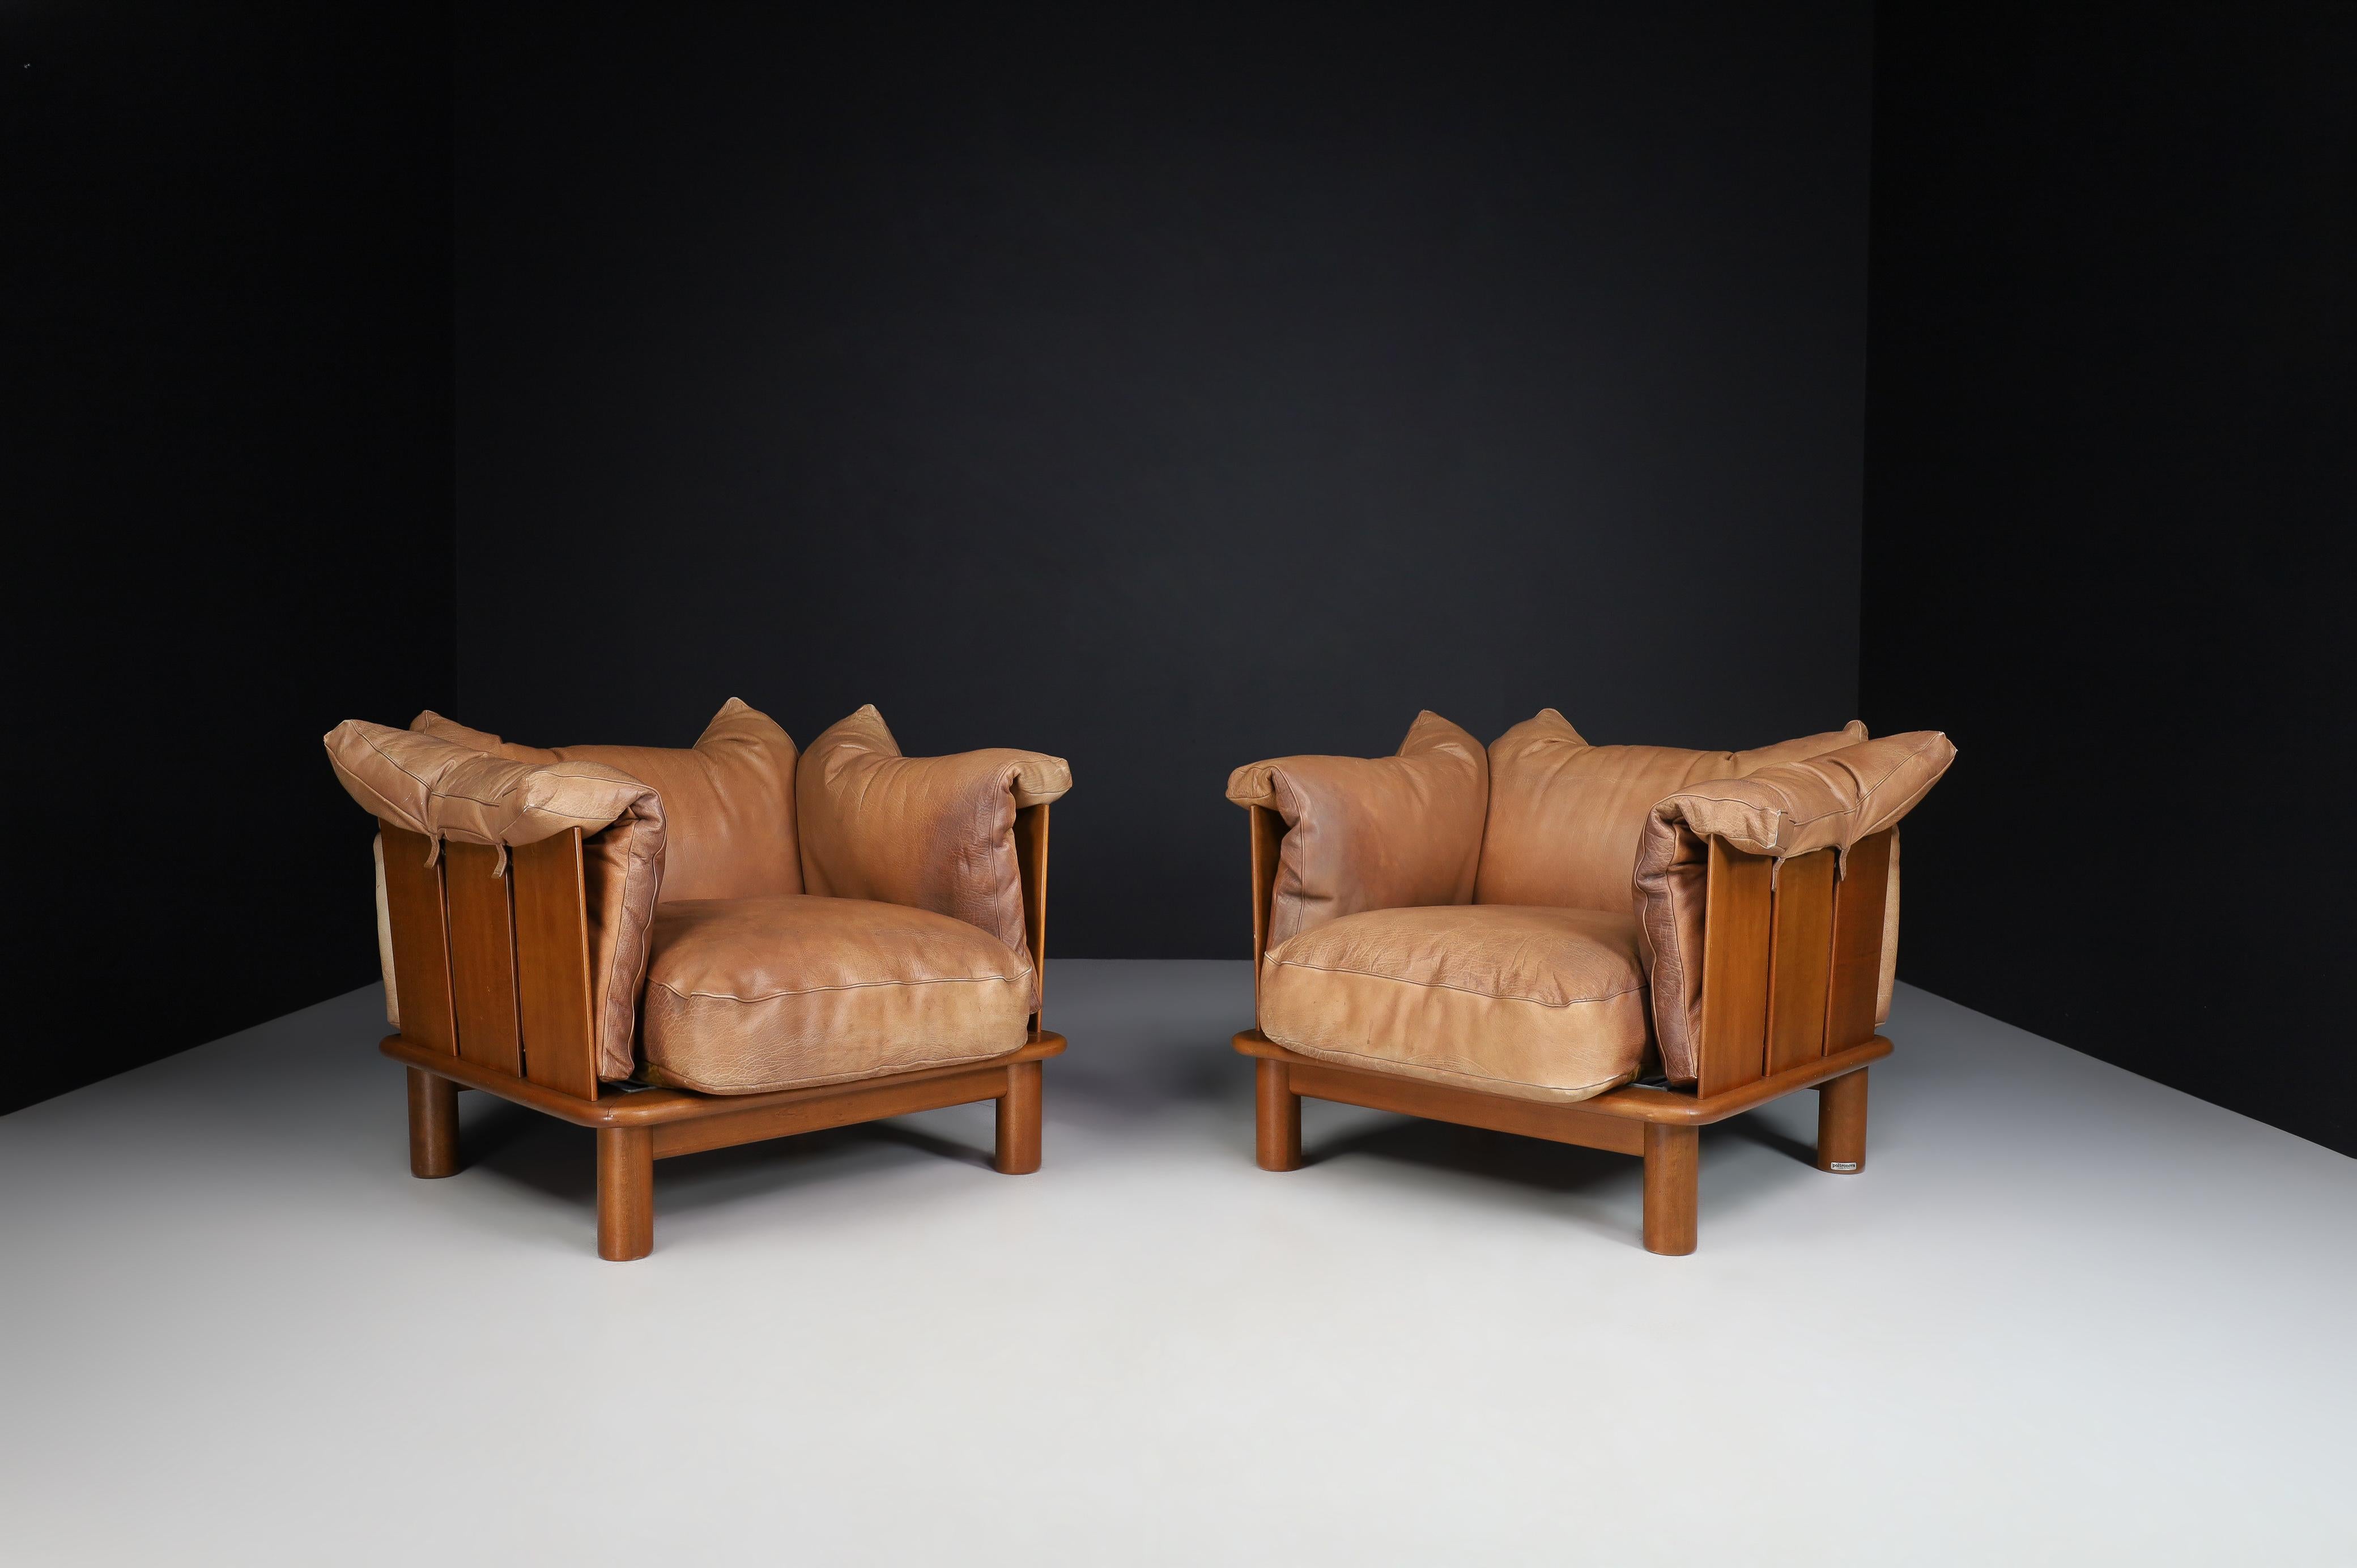 Mid-Century Modern pair of two lounge chairs, patinated brown leather, walnut, De Pas, D'Urbino & Lomazzi, Padova, Italy 1970s

Comfortable and gorgeous seating pieces by these Italian masters. The patina of the leather is just how we like it to